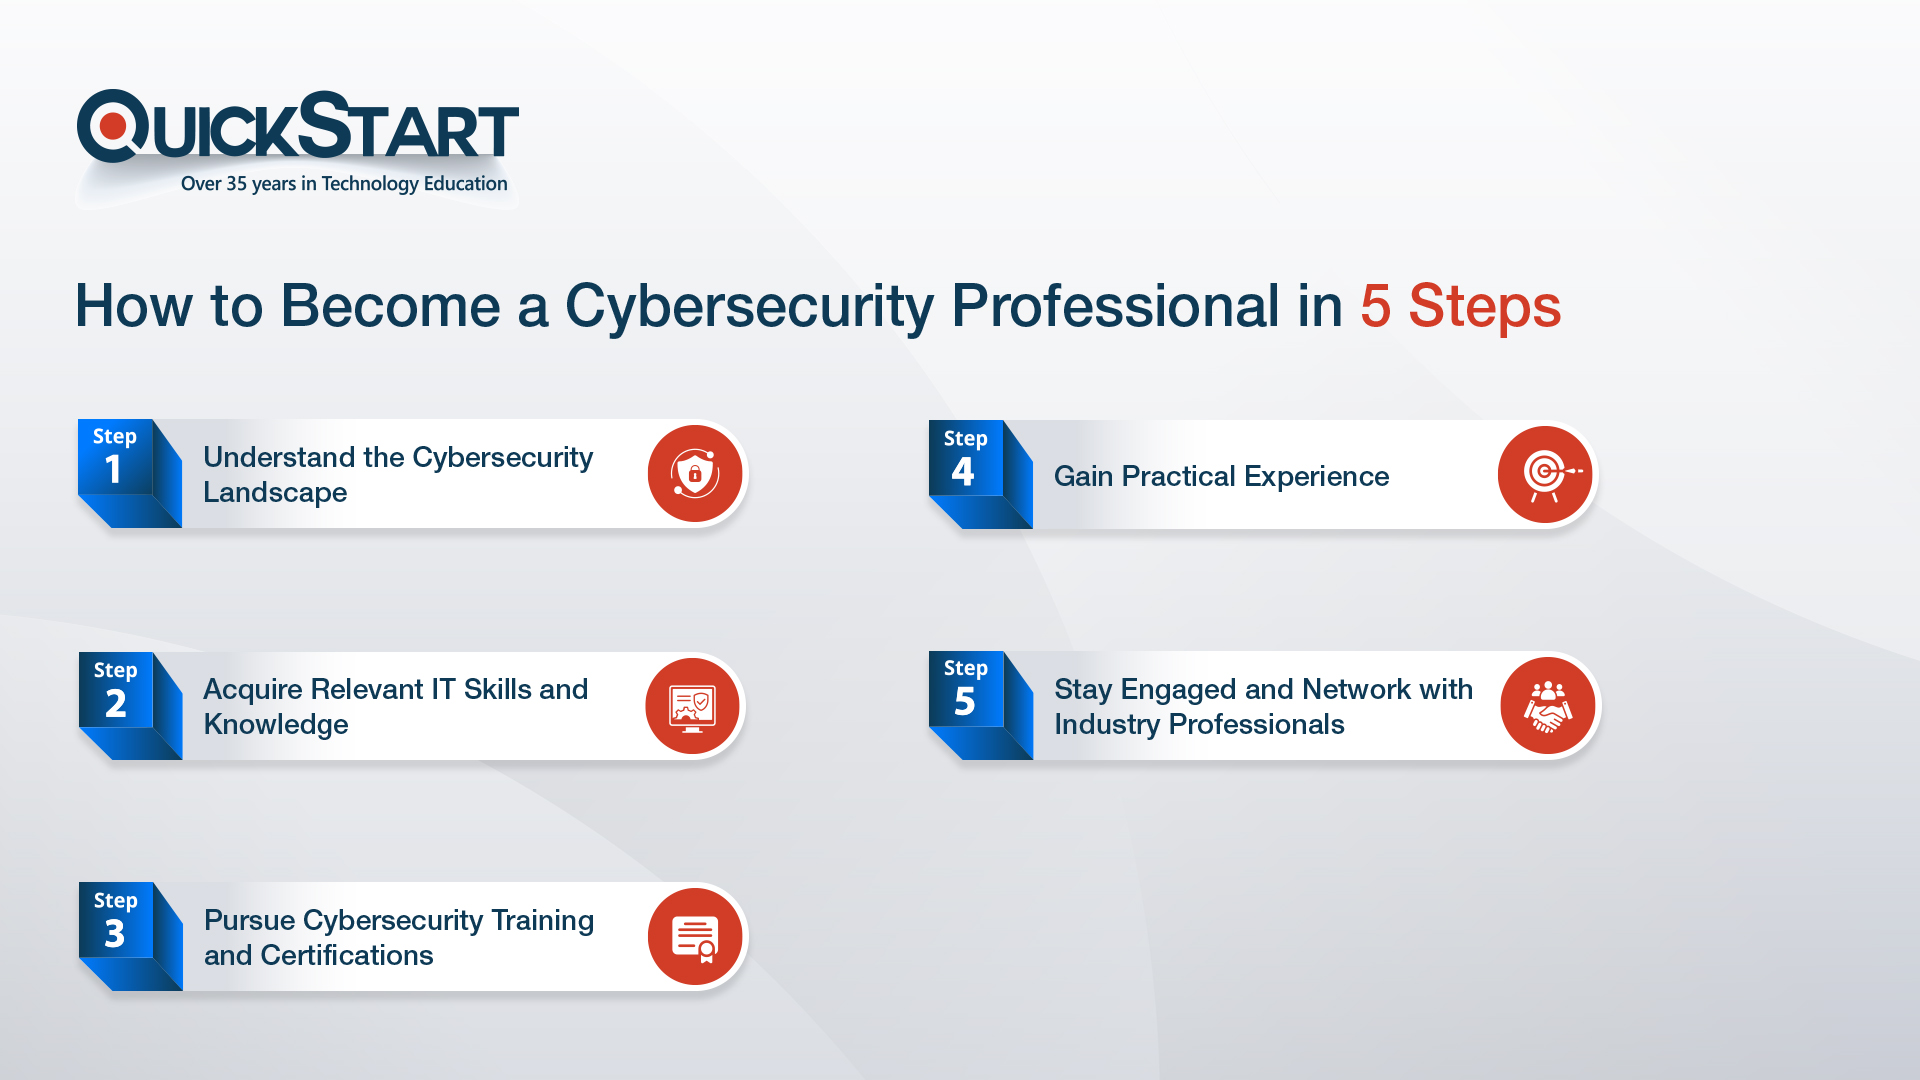 5 Steps To Become a Cybersecurity Professional